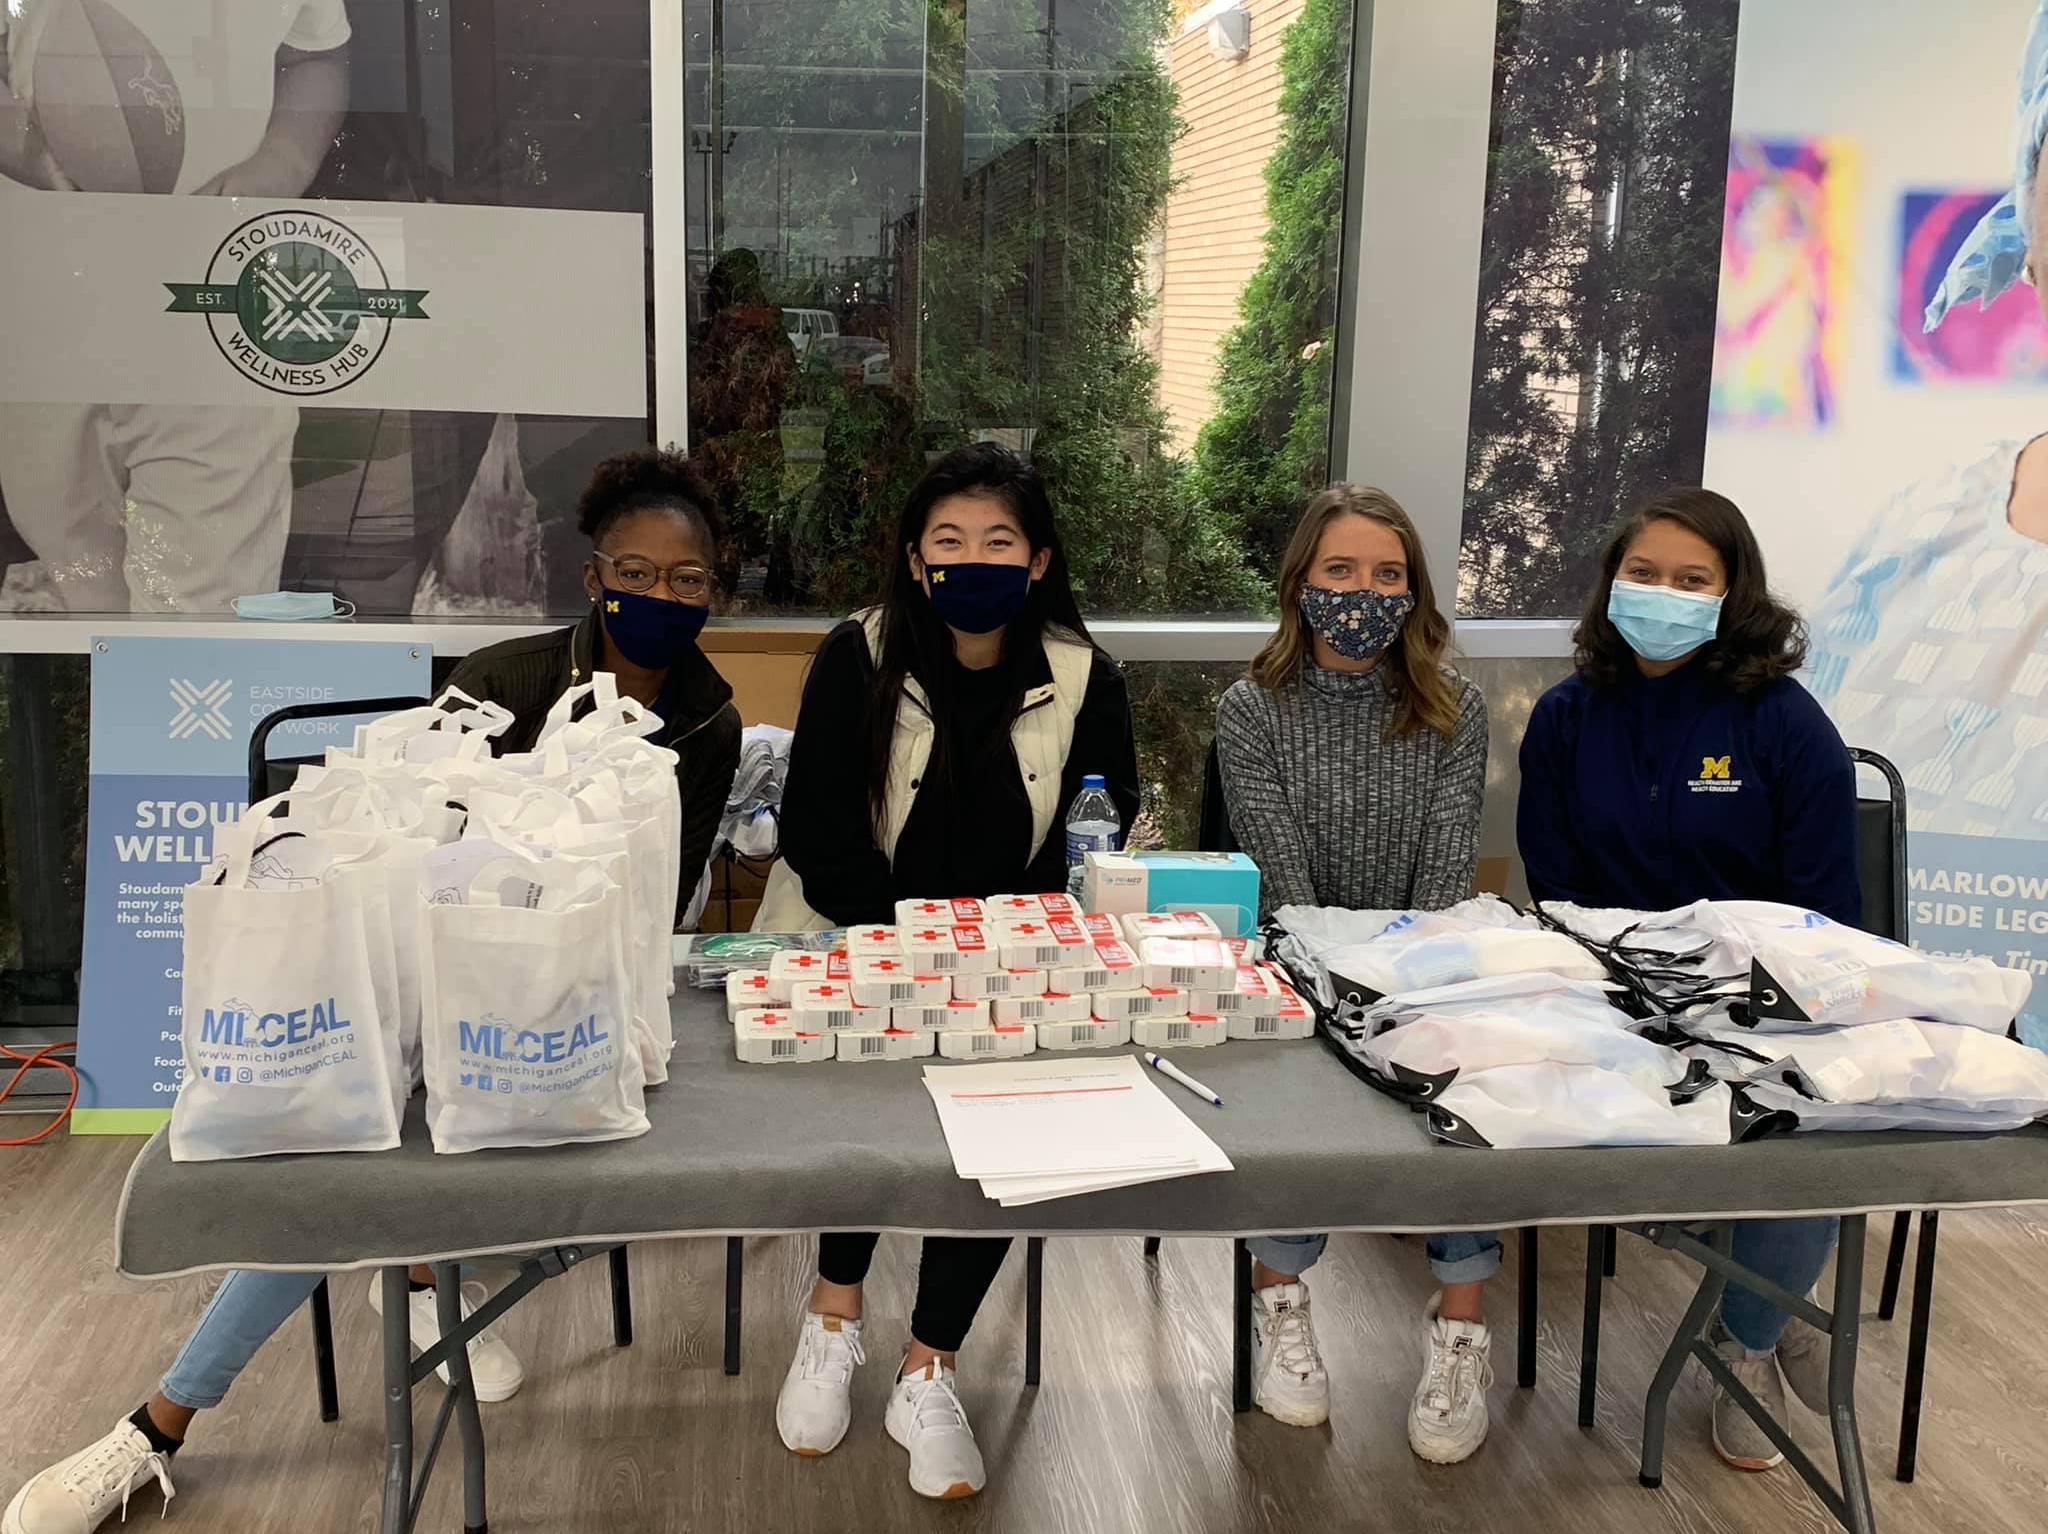 Four young women wearing masks sit at a volunteer table